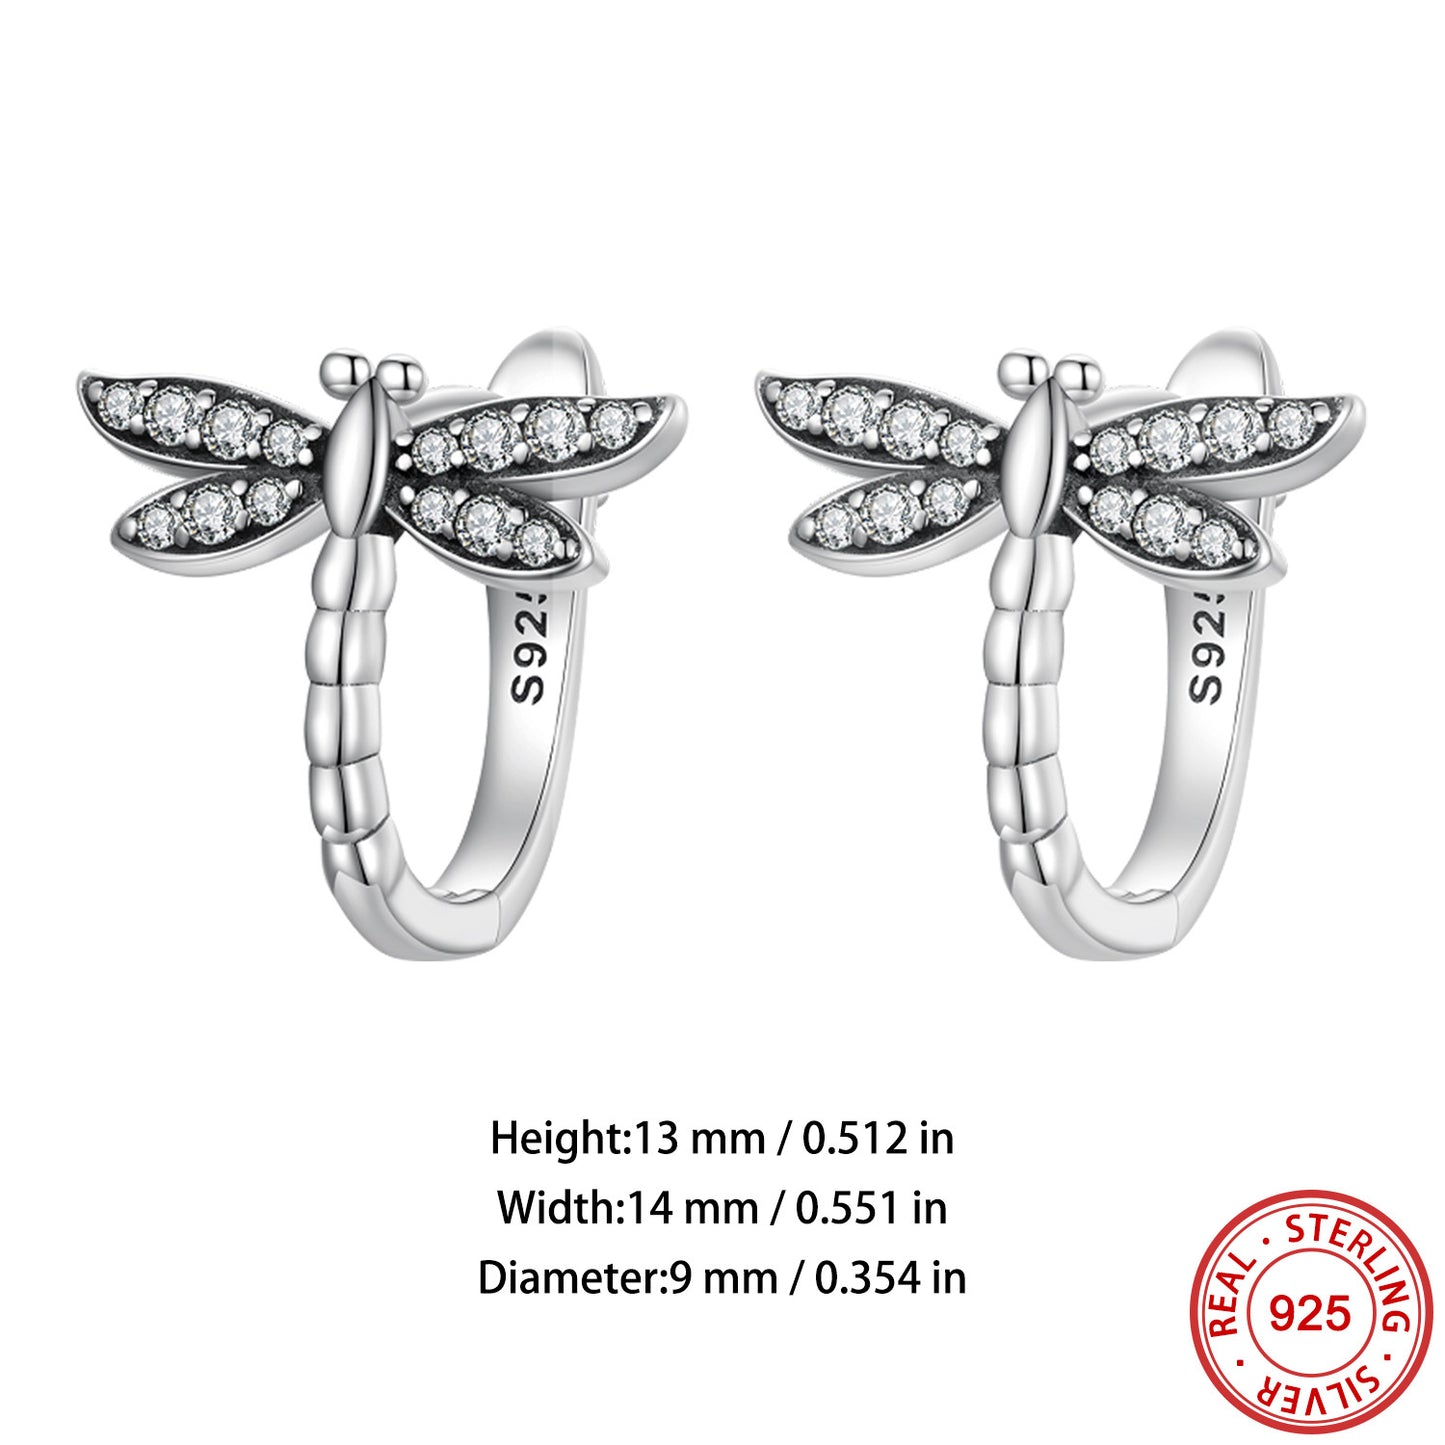 Sterling 925 Silver Jewelry Exquisite Dragonfly Pattern Shiny Zircon Decor Hoop Earrings Elegant Pastoral Style Female Gift